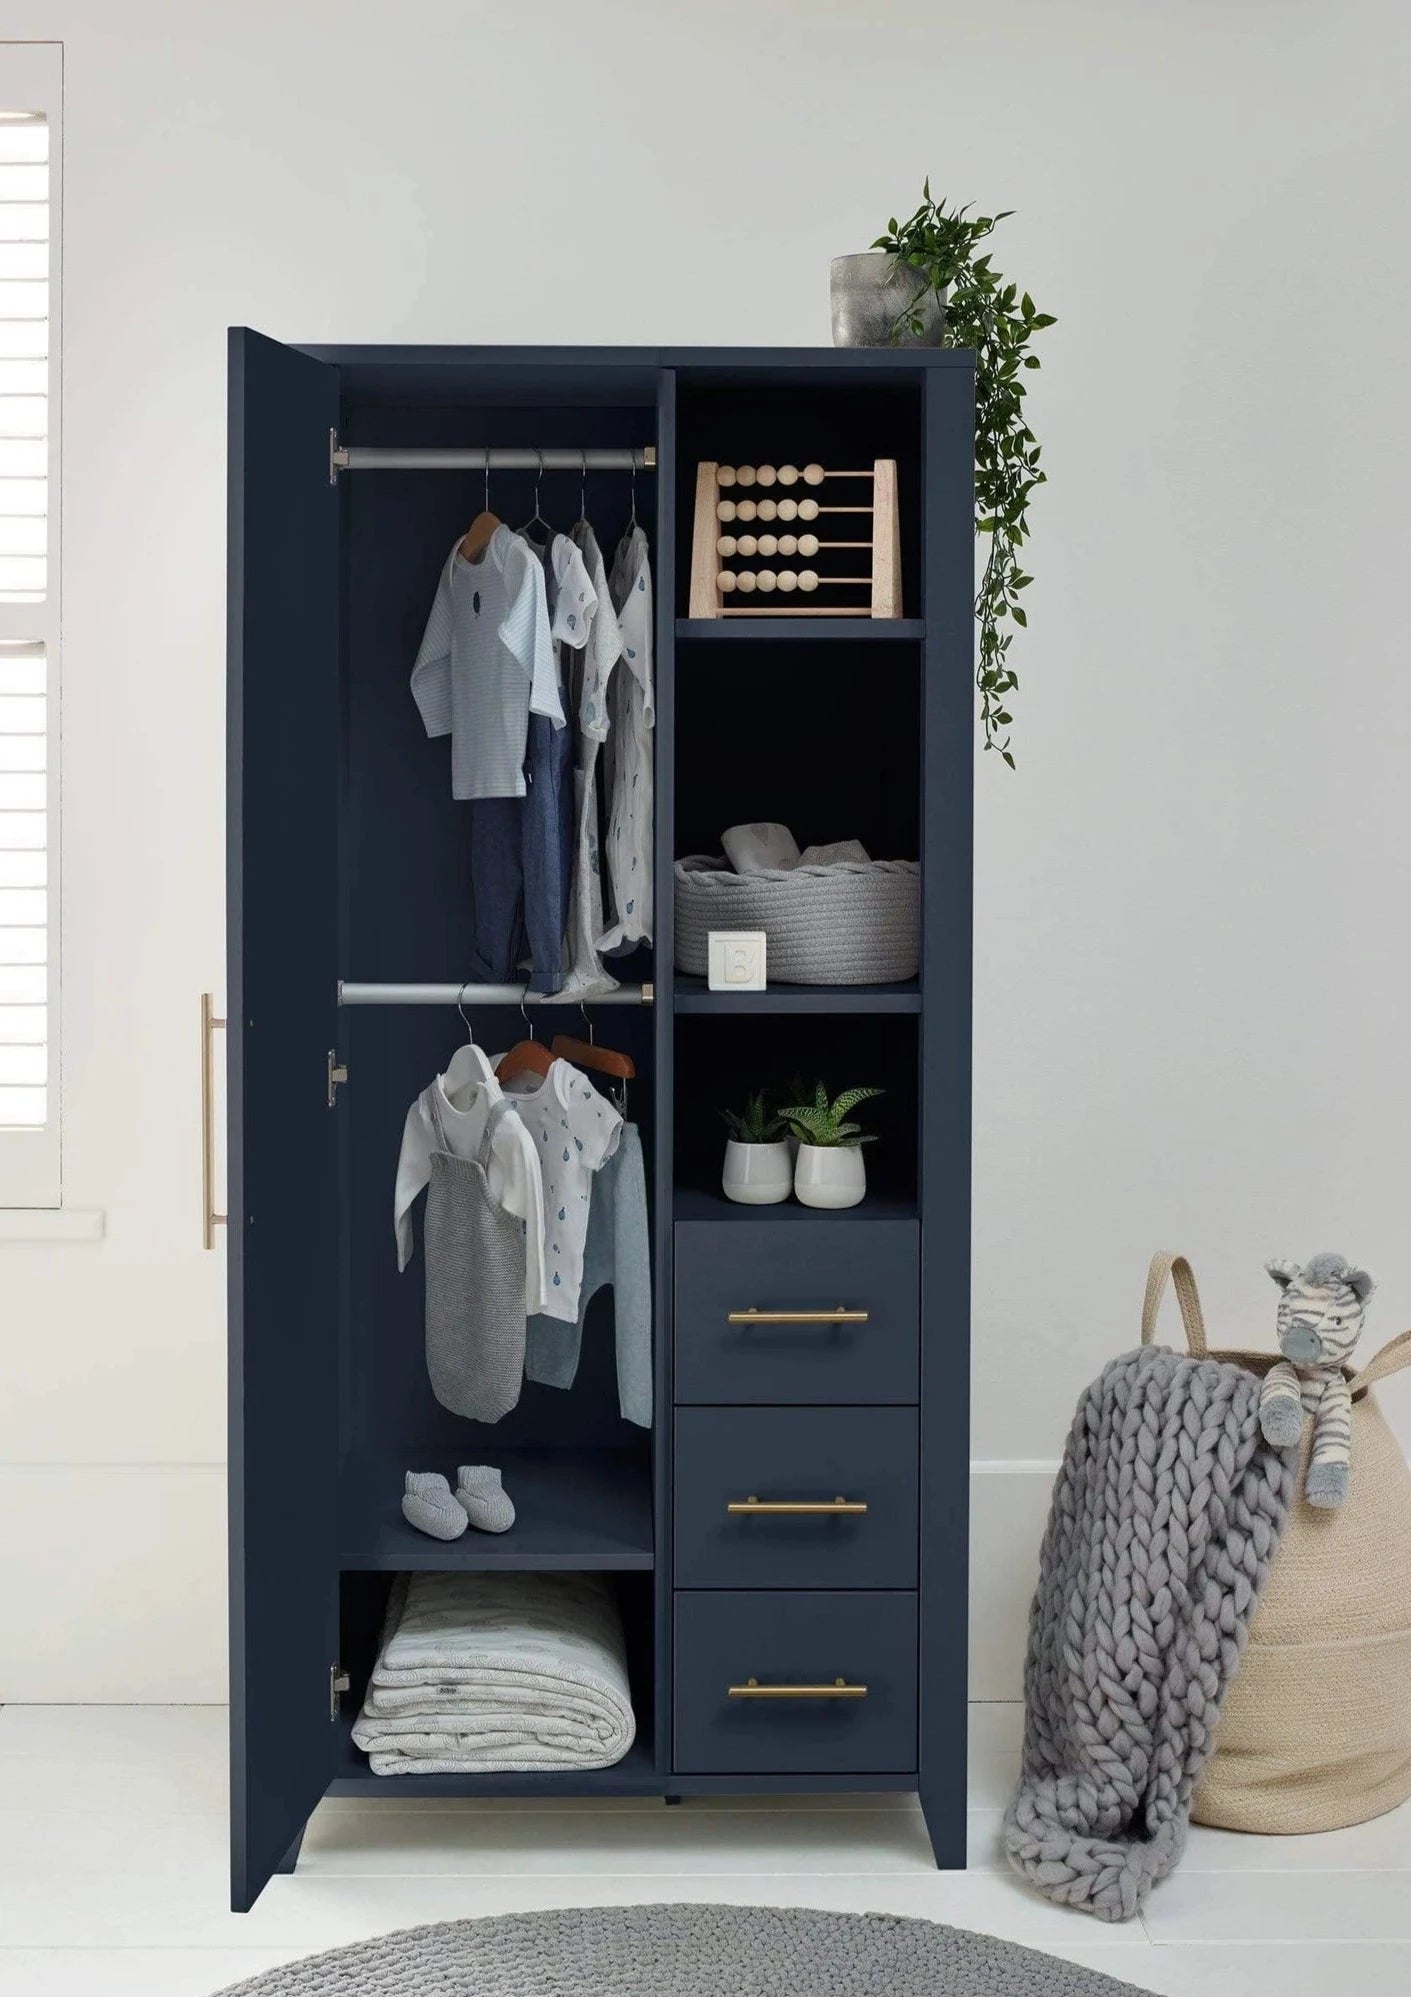 Mamas and Papas Melfi Cotbed, Dresser and Storage Wardrobe - SweetDreamzzzPenryn